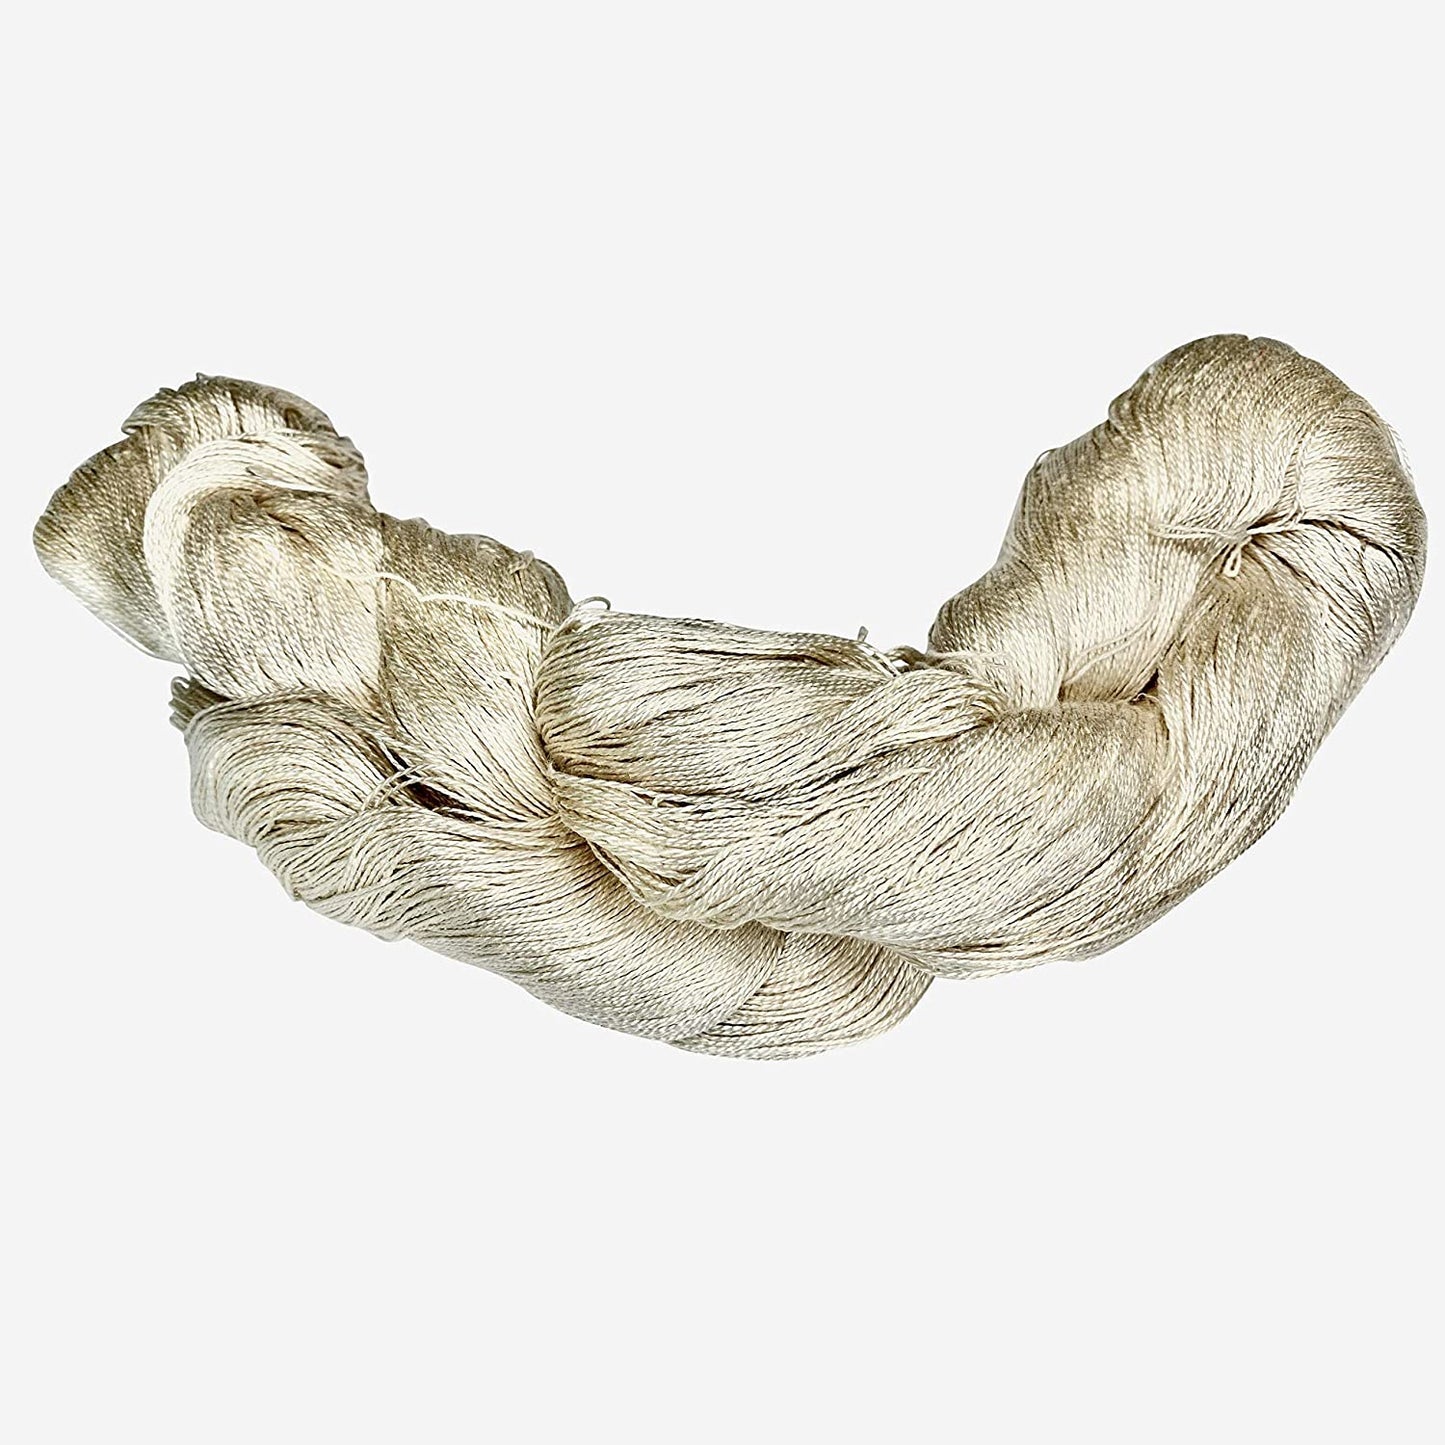 Mulberry Silk Yarn | Lace Weight 20/2 NM